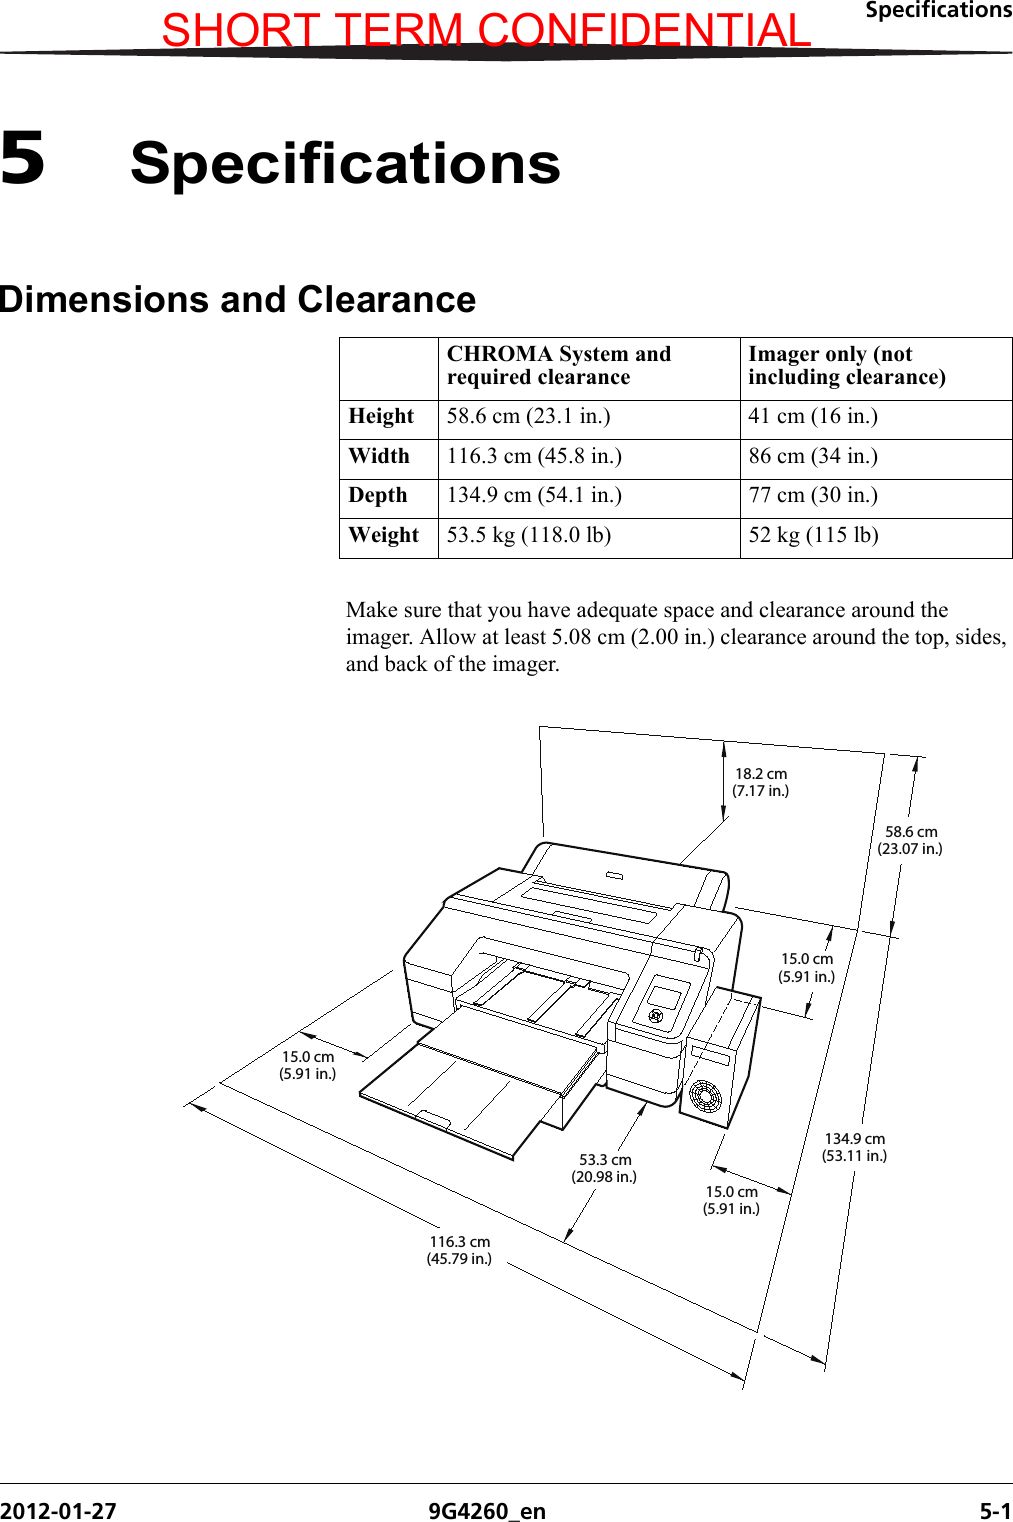 Specifications2012-01-27 9G4260_en 5-15SpecificationsDimensions and ClearanceMake sure that you have adequate space and clearance around the imager. Allow at least 5.08 cm (2.00 in.) clearance around the top, sides, and back of the imager.CHROMA System and required clearanceImager only (not including clearance)Height 58.6 cm (23.1 in.) 41 cm (16 in.)Width 116.3 cm (45.8 in.) 86 cm (34 in.)Depth 134.9 cm (54.1 in.) 77 cm (30 in.)Weight 53.5 kg (118.0 lb) 52 kg (115 lb)H210_0613HC15.0 cm58.6 cm134.9 cm53.3 cm15.0 cm116.3 cm18.2 cm15.0 cm(5.91 in.)(5.91 in.)(23.07 in.)(53.11 in.)(20.98 in.)(5.91 in.)(45.79 in.)(7.17 in.)SHORT TERM CONFIDENTIAL